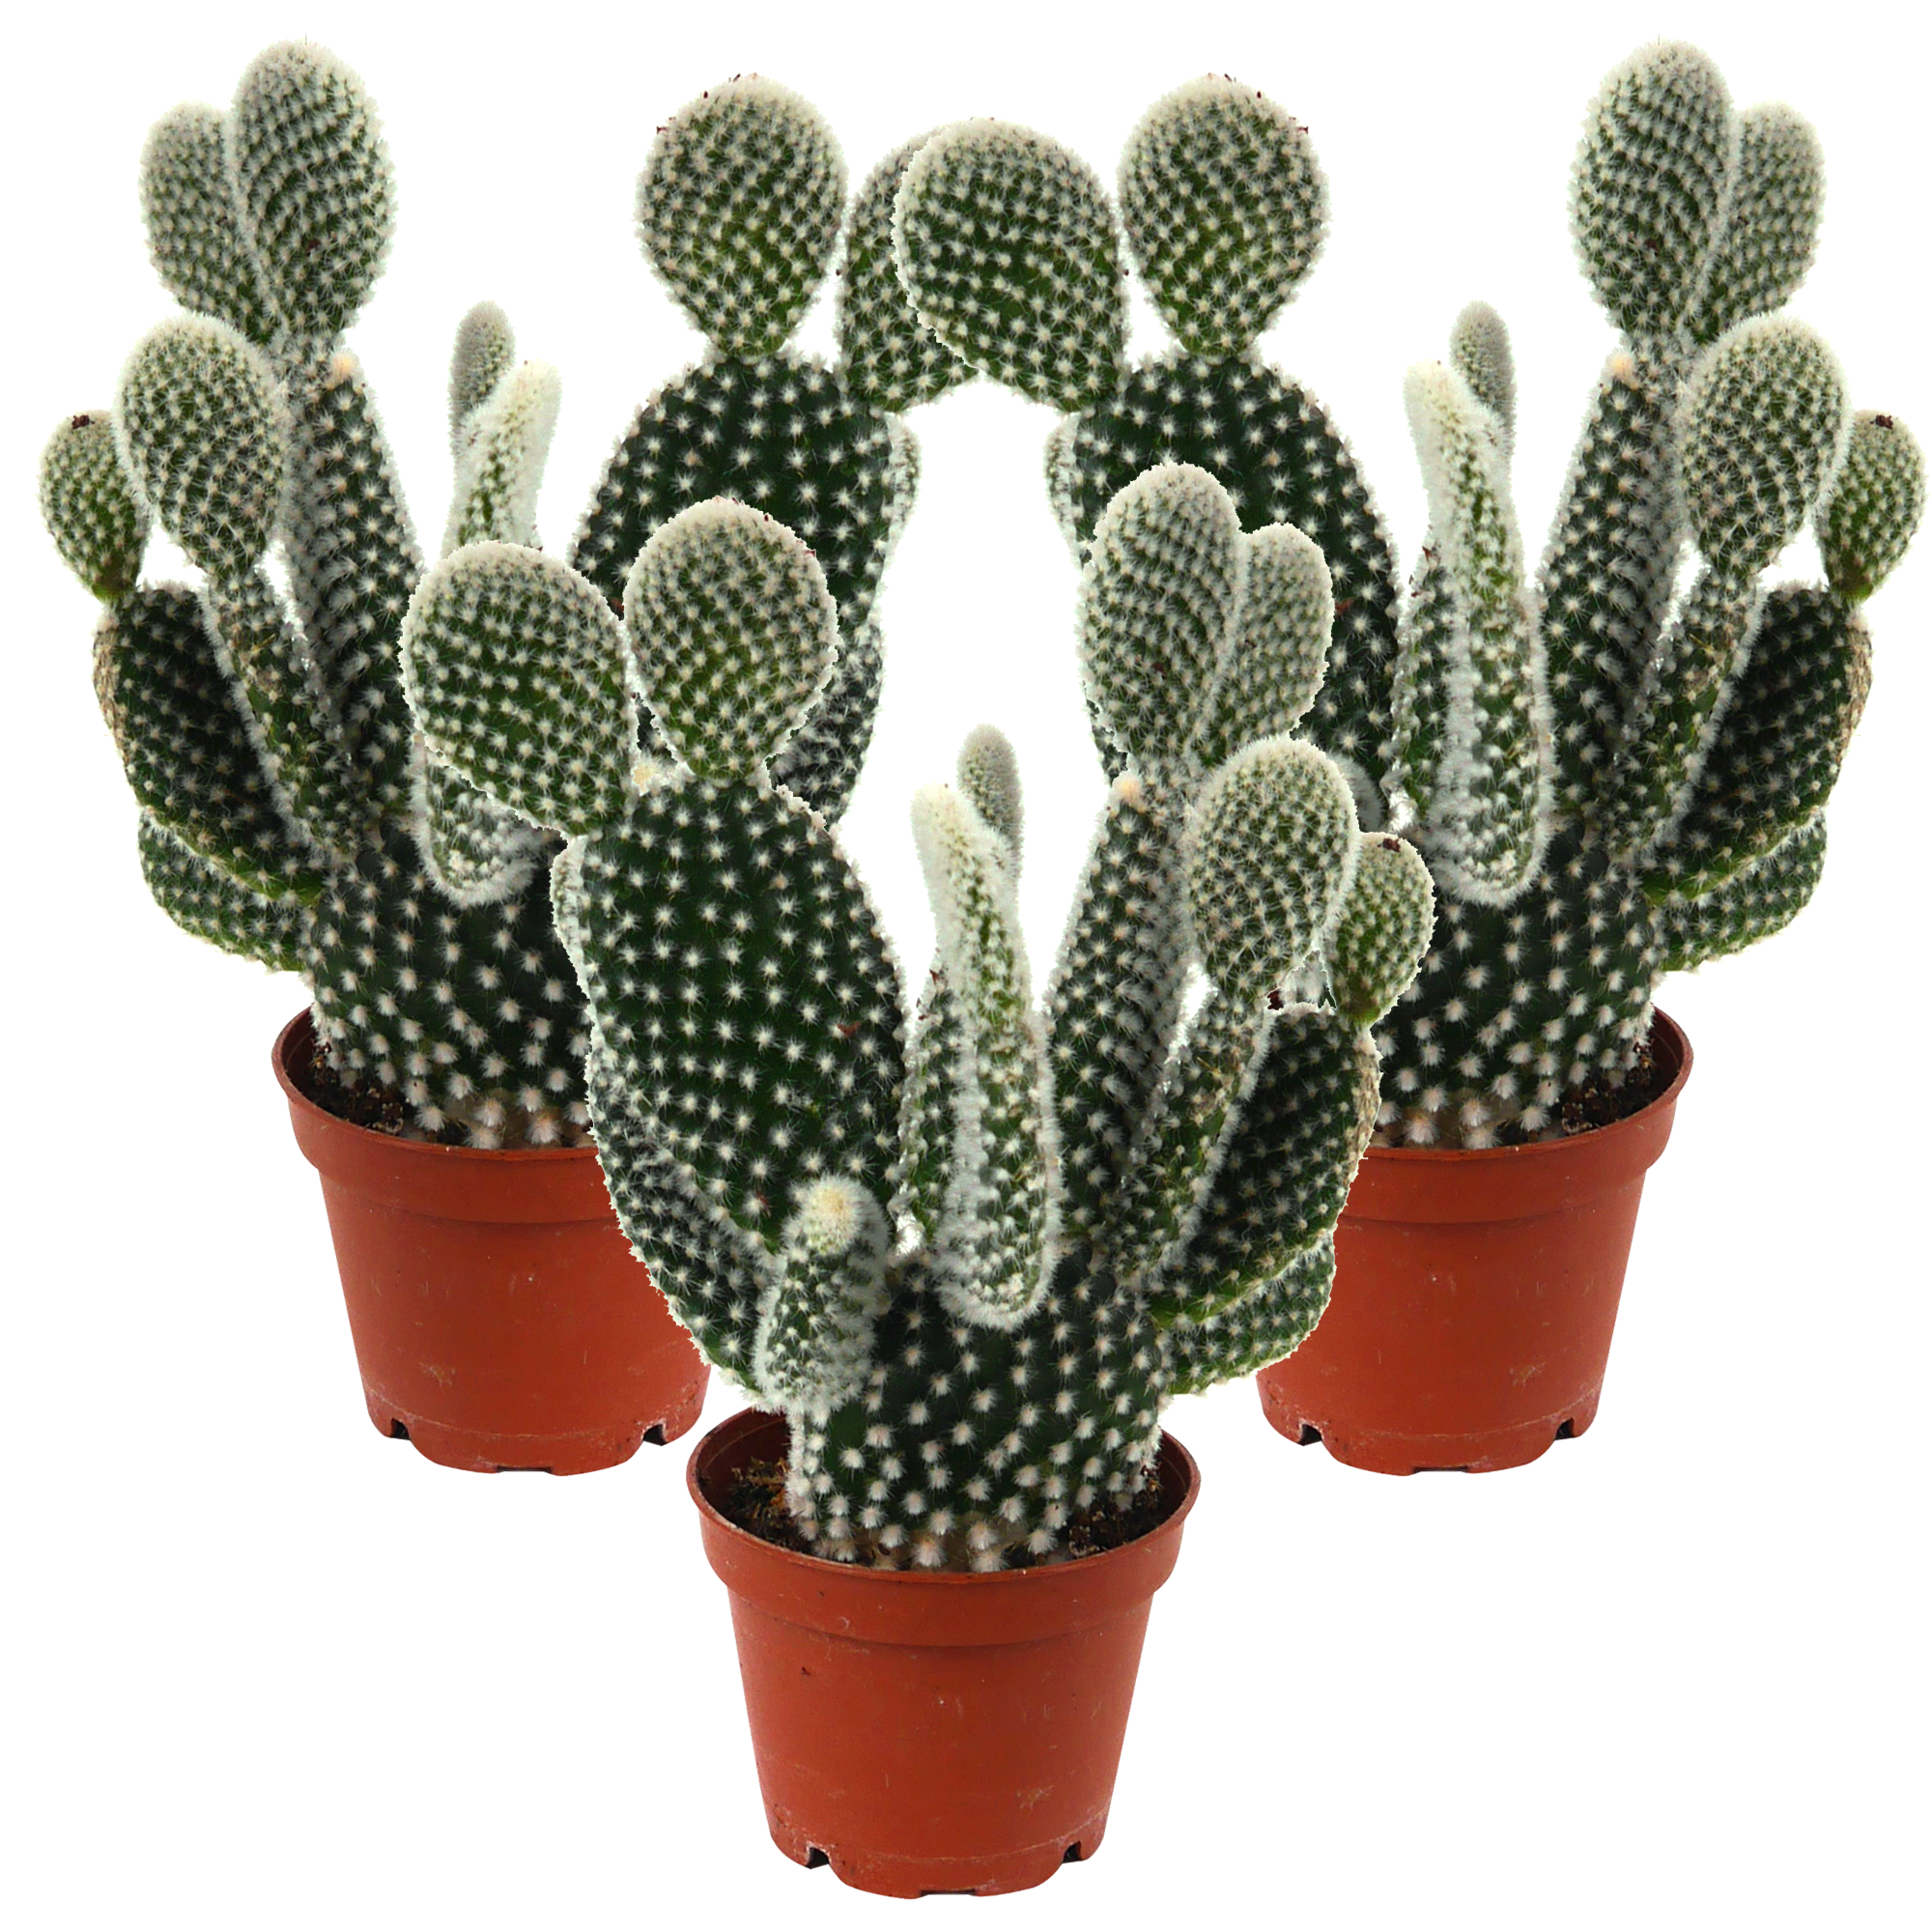 Opuntia microdasys-Mix 6 cm Topf, 3er-Set + product picture